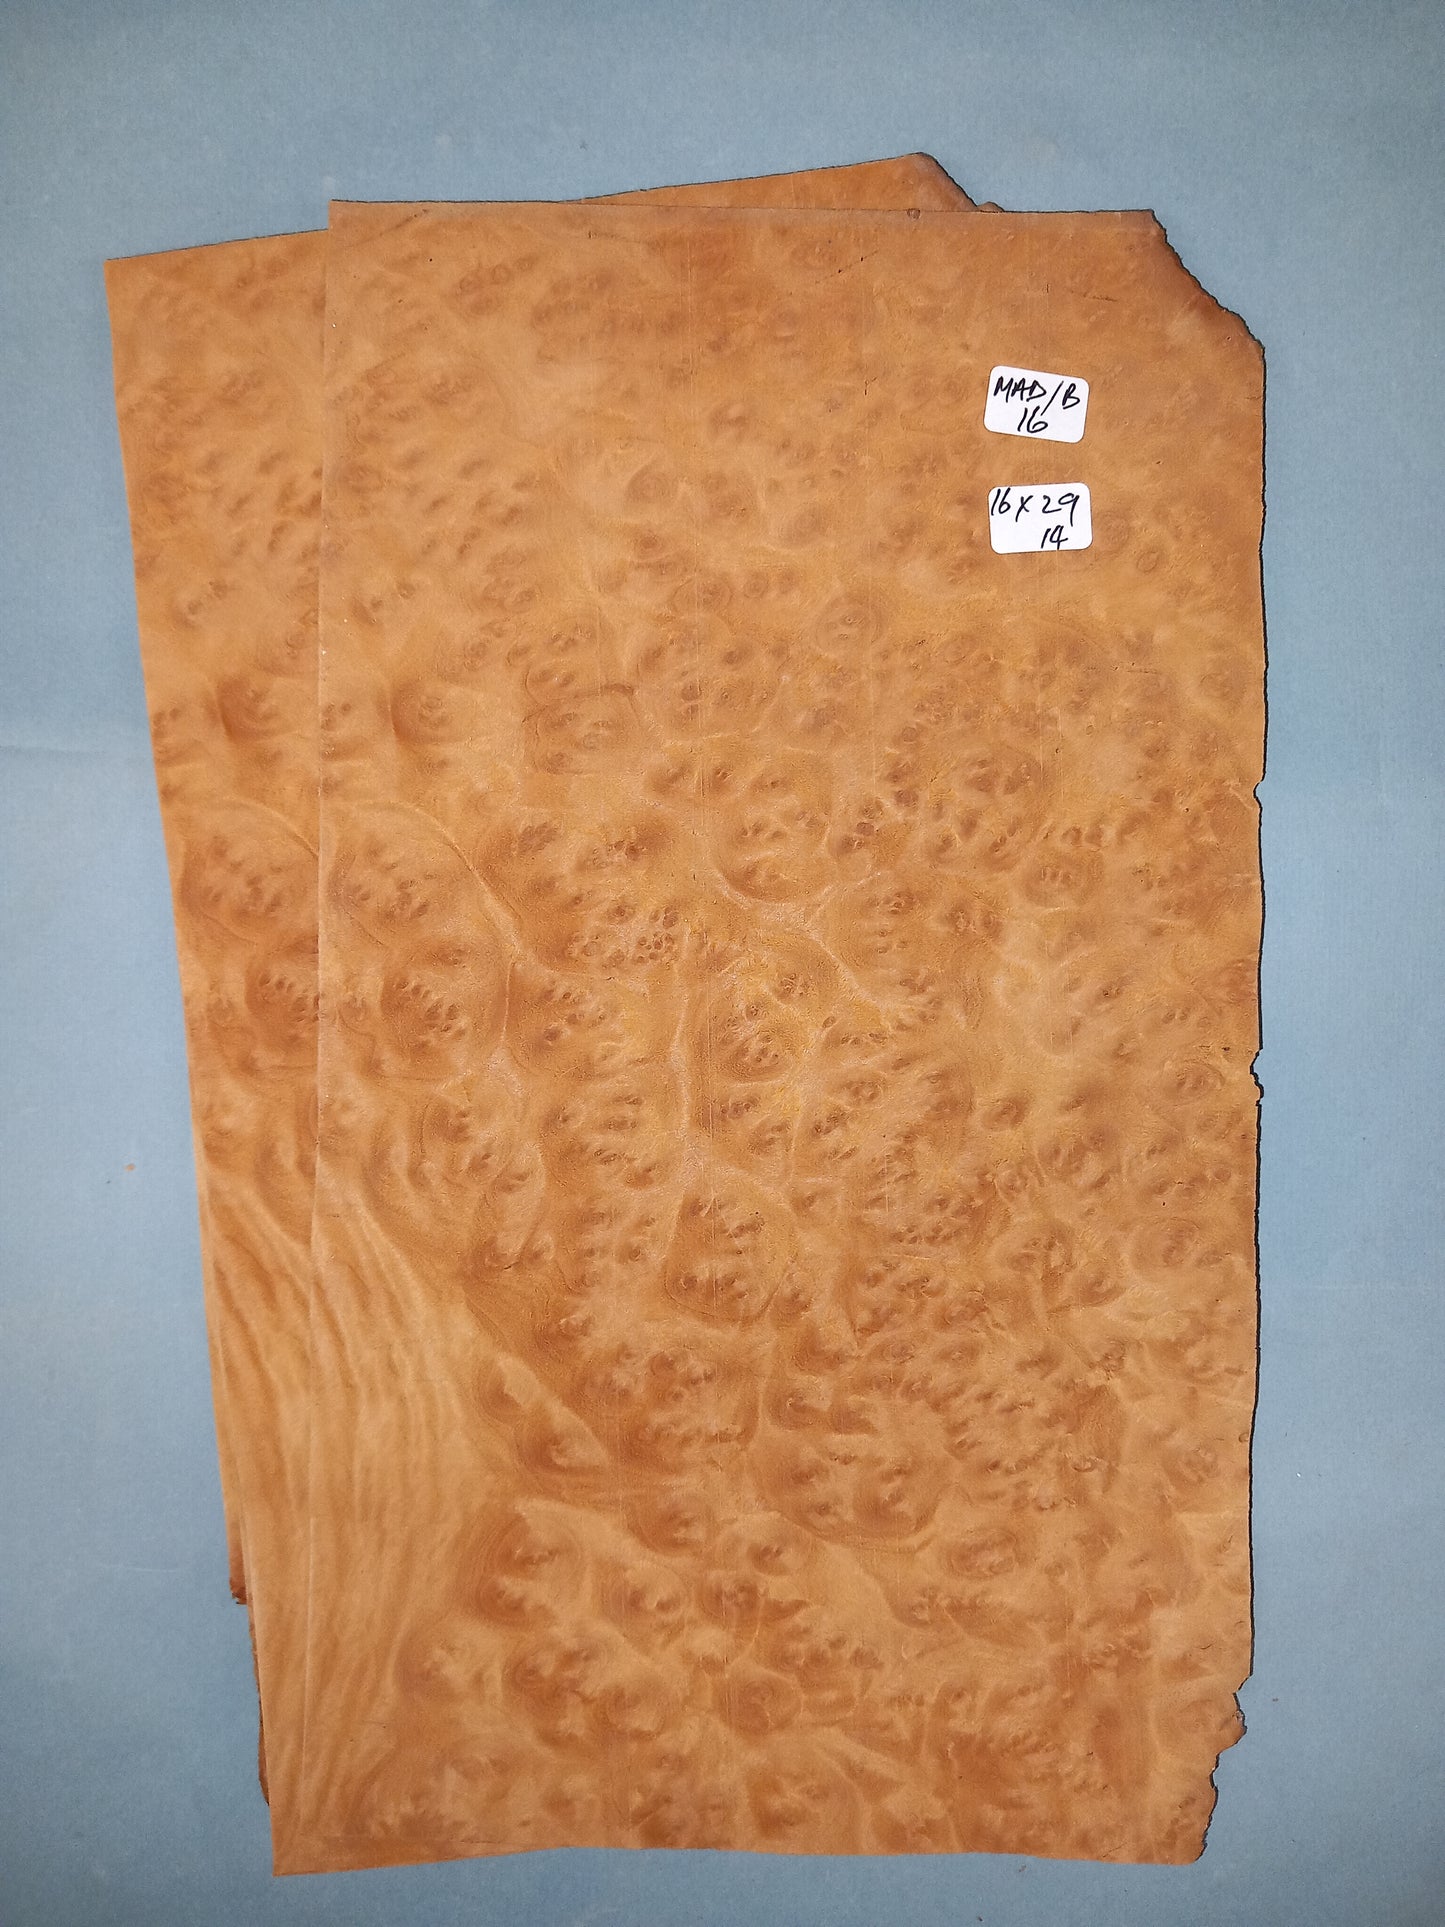 2 CONSECUTIVE SHEETS OF BURR MADRONE VENEER     16 X 29 CM